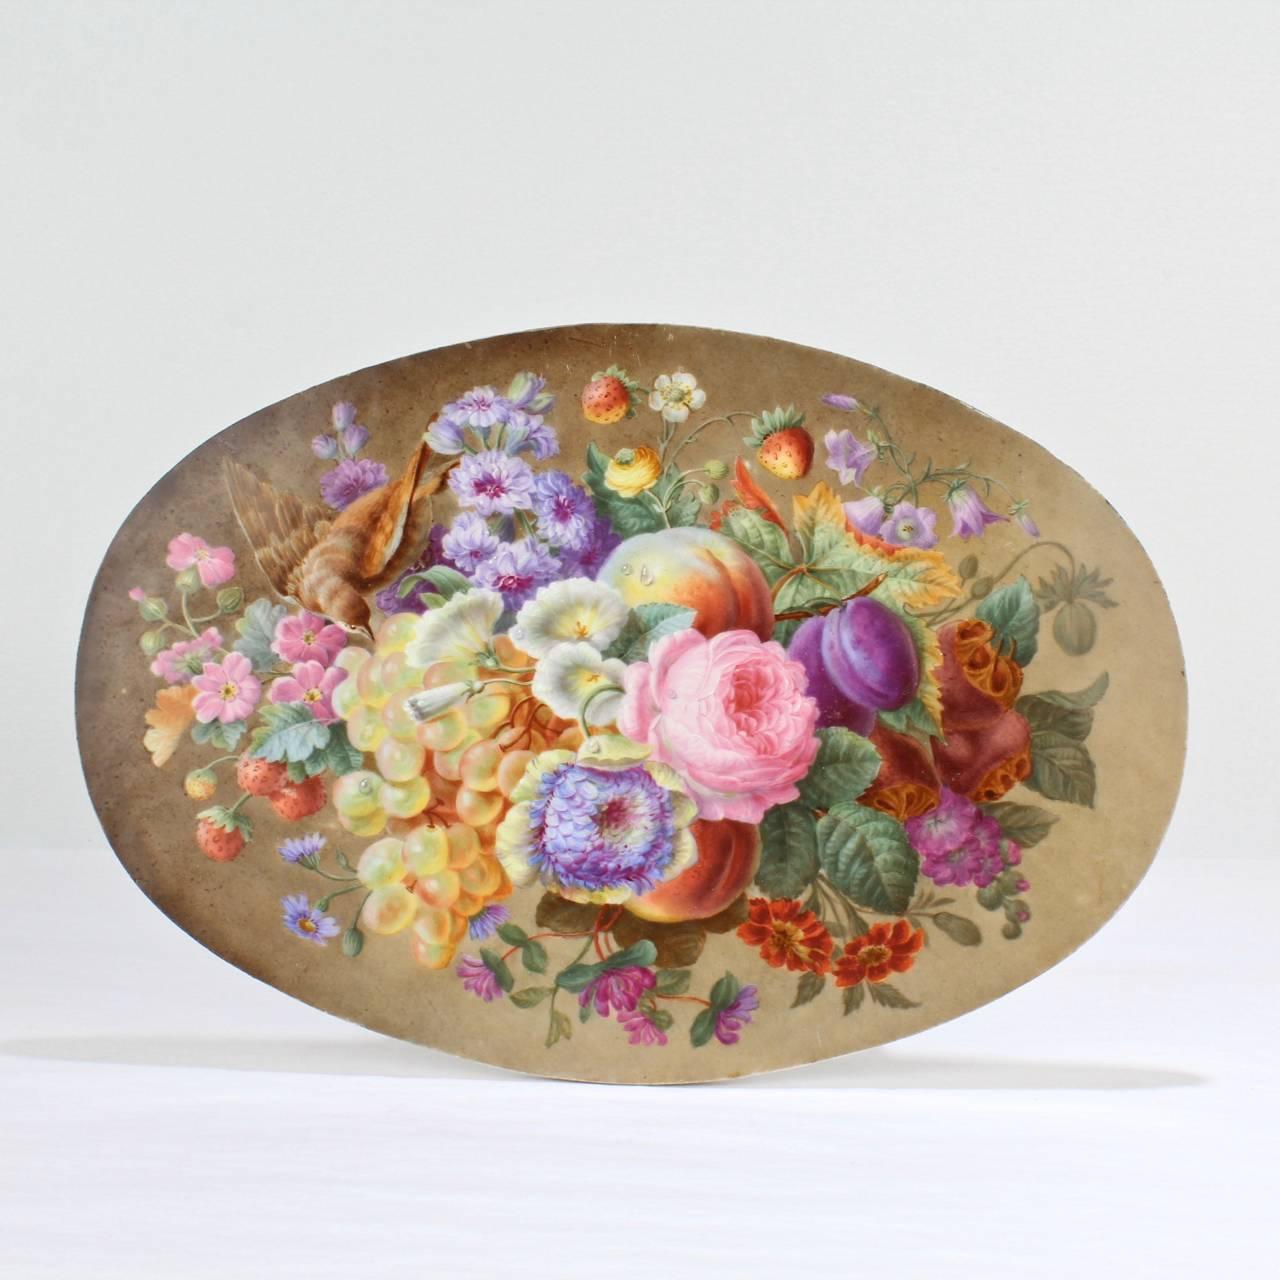 A good, English oval shaped porcelain plaque in the manner of Thomas Steel.

Very well painted with flowers, a peach, plums, seed pods, water droplets, and even a bird on a mottled brown ground.

Possibly Rockingham.

The reverse is